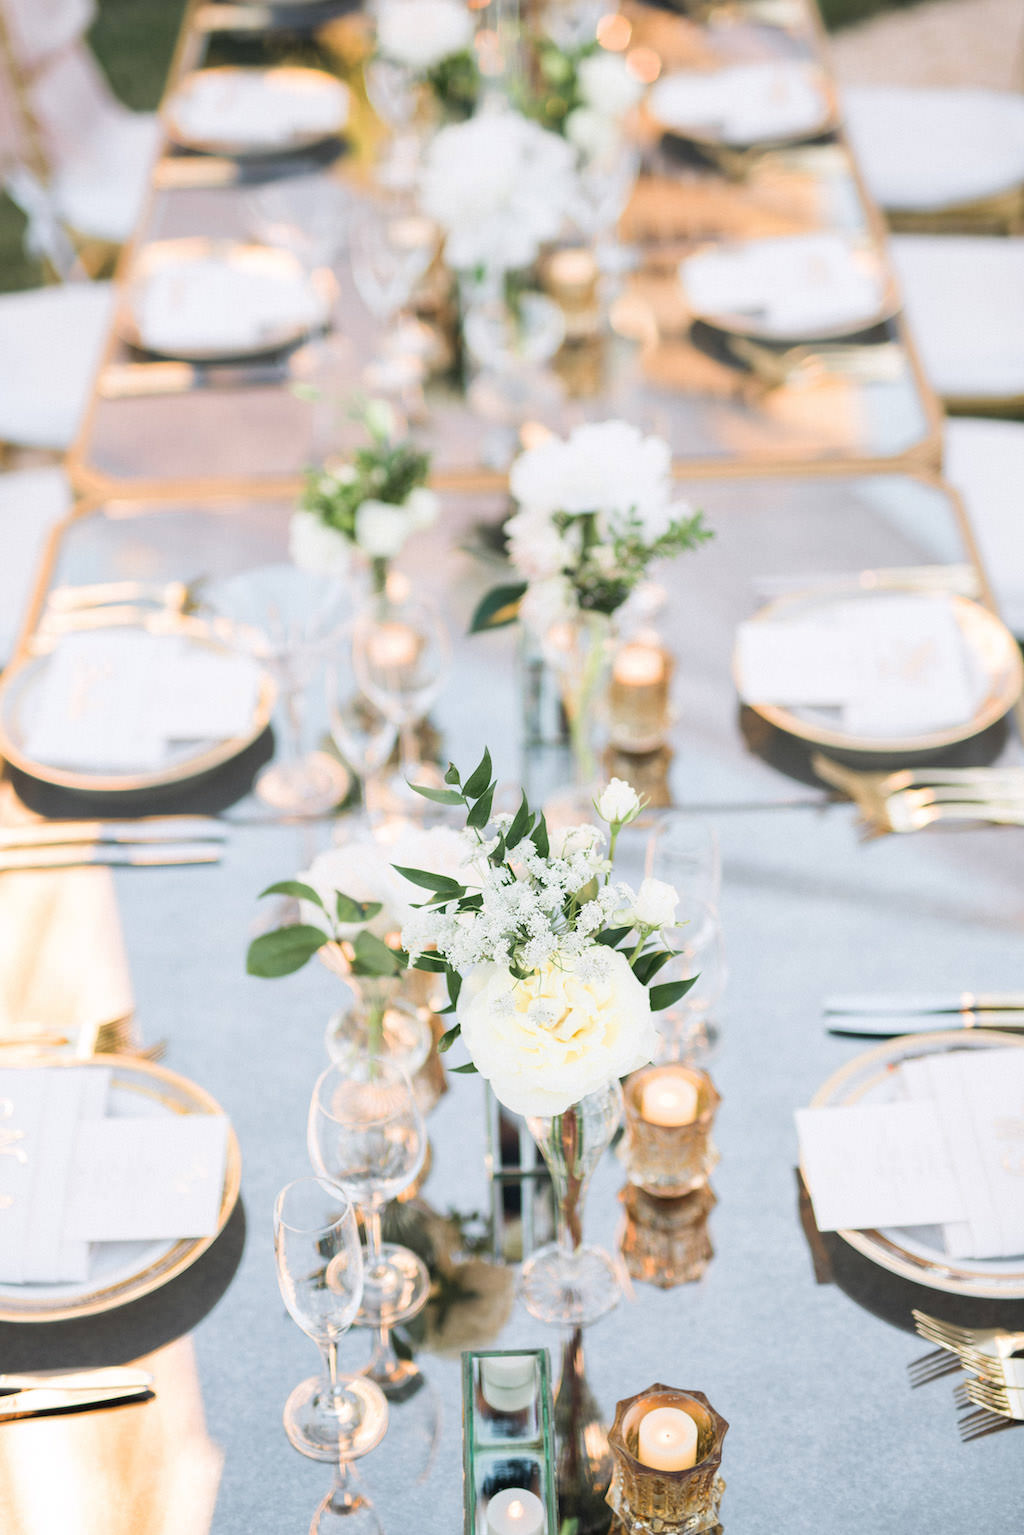 Elegant, Classic, Garden Inspired Wedding Decor and Reception, Gold Modern Feasting Tables with Gold Chiavari Chairs, Low White and Green Floral Centerpieces | Tampa Bay Wedding Planner NK Weddings